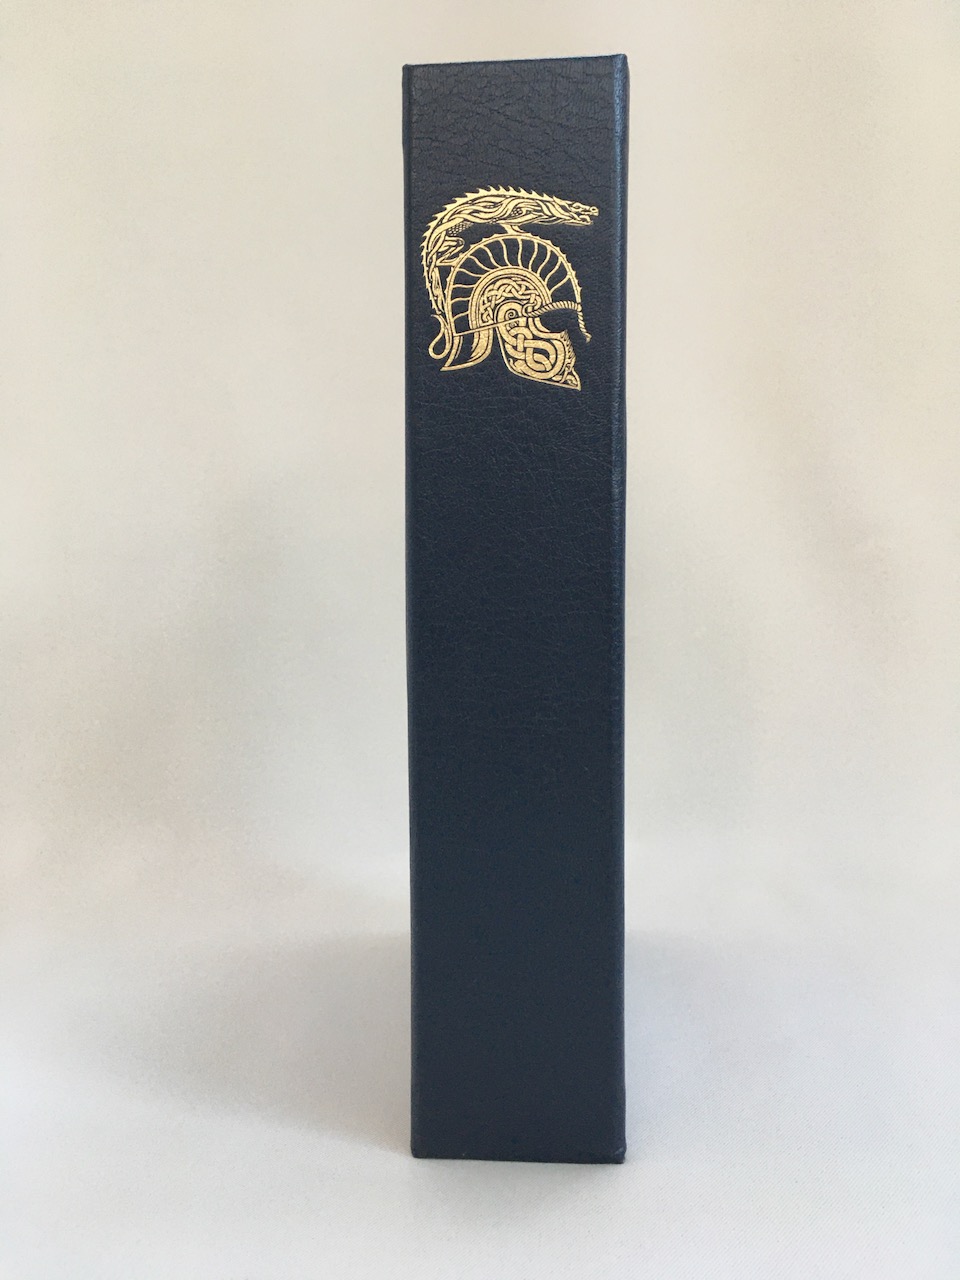 
The Children of Hurin Leather Signed Limited Edition - Super Deluxe Edition 1